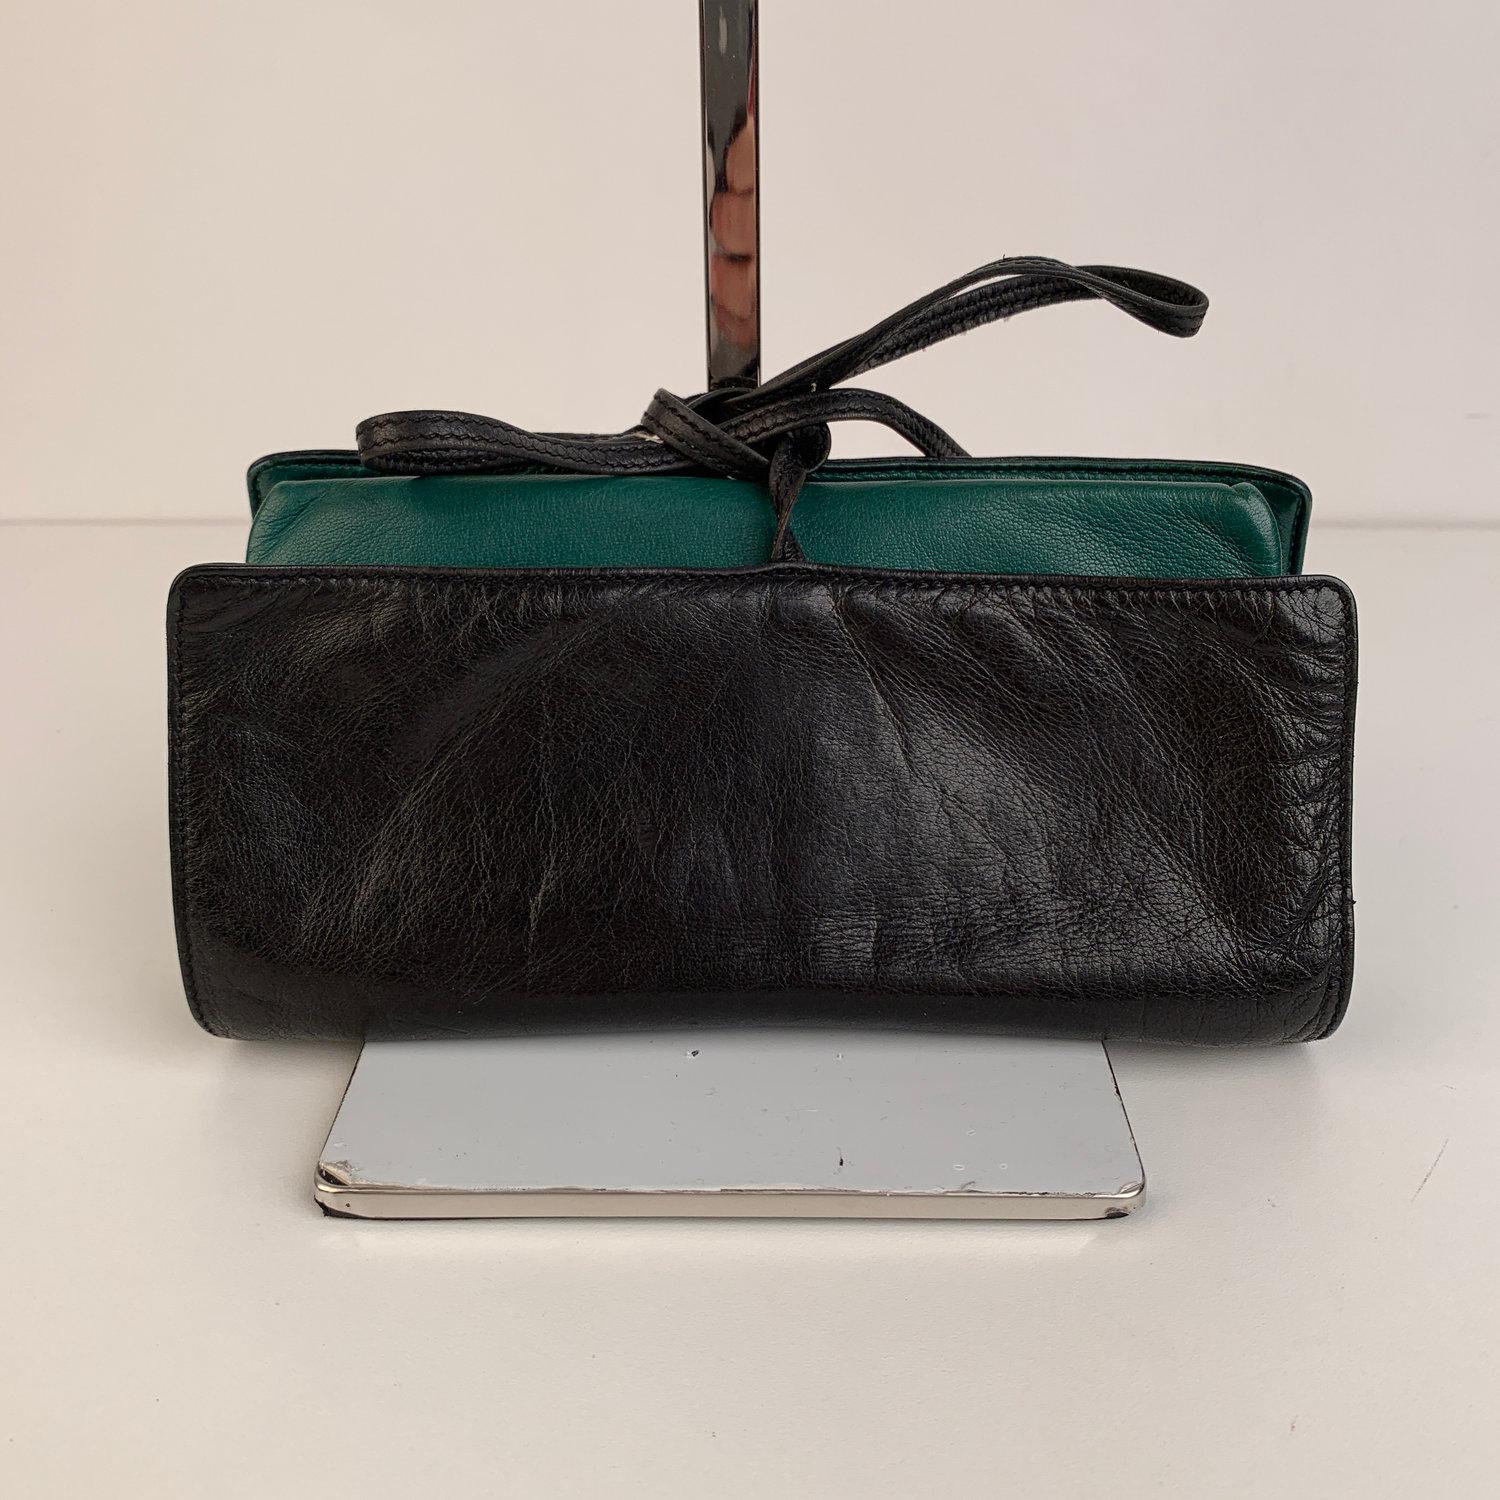 Nice GUCCI Jewelry case crafted in soft black leather. Green leather on the inside. 4 zip compartments and self-tie closure. It will keep your jewelry protected and organized and safe while on the go. A perfect travel companion that with tuck nicely